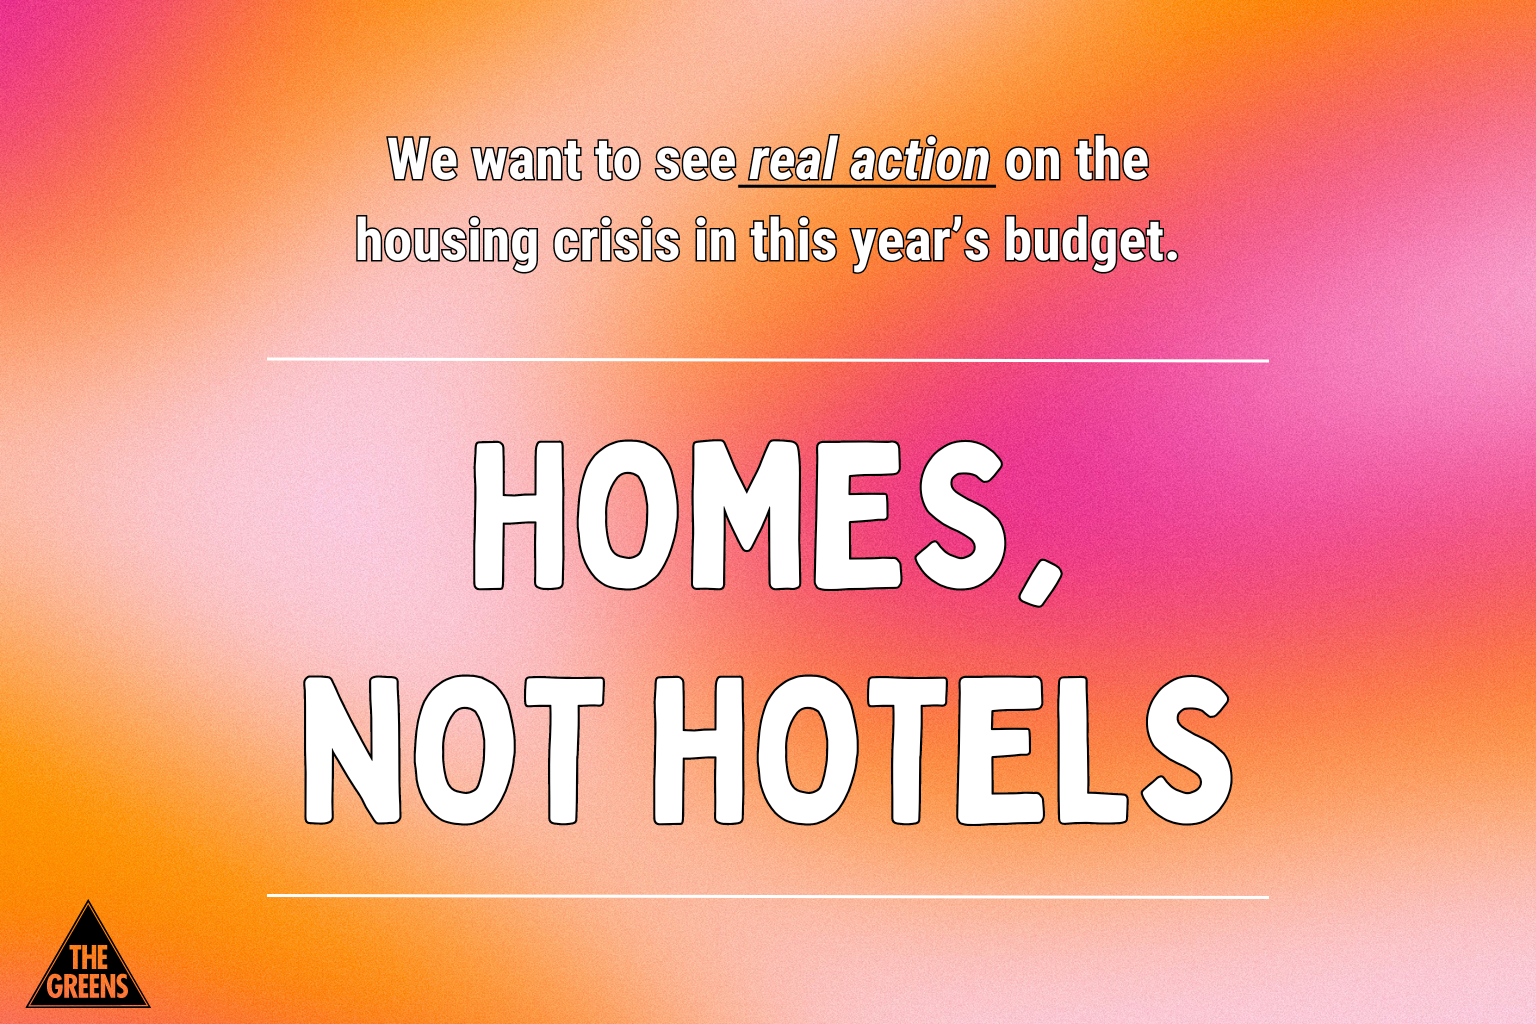 Text reads: "Homes, not hotels" on a pink and orange background.